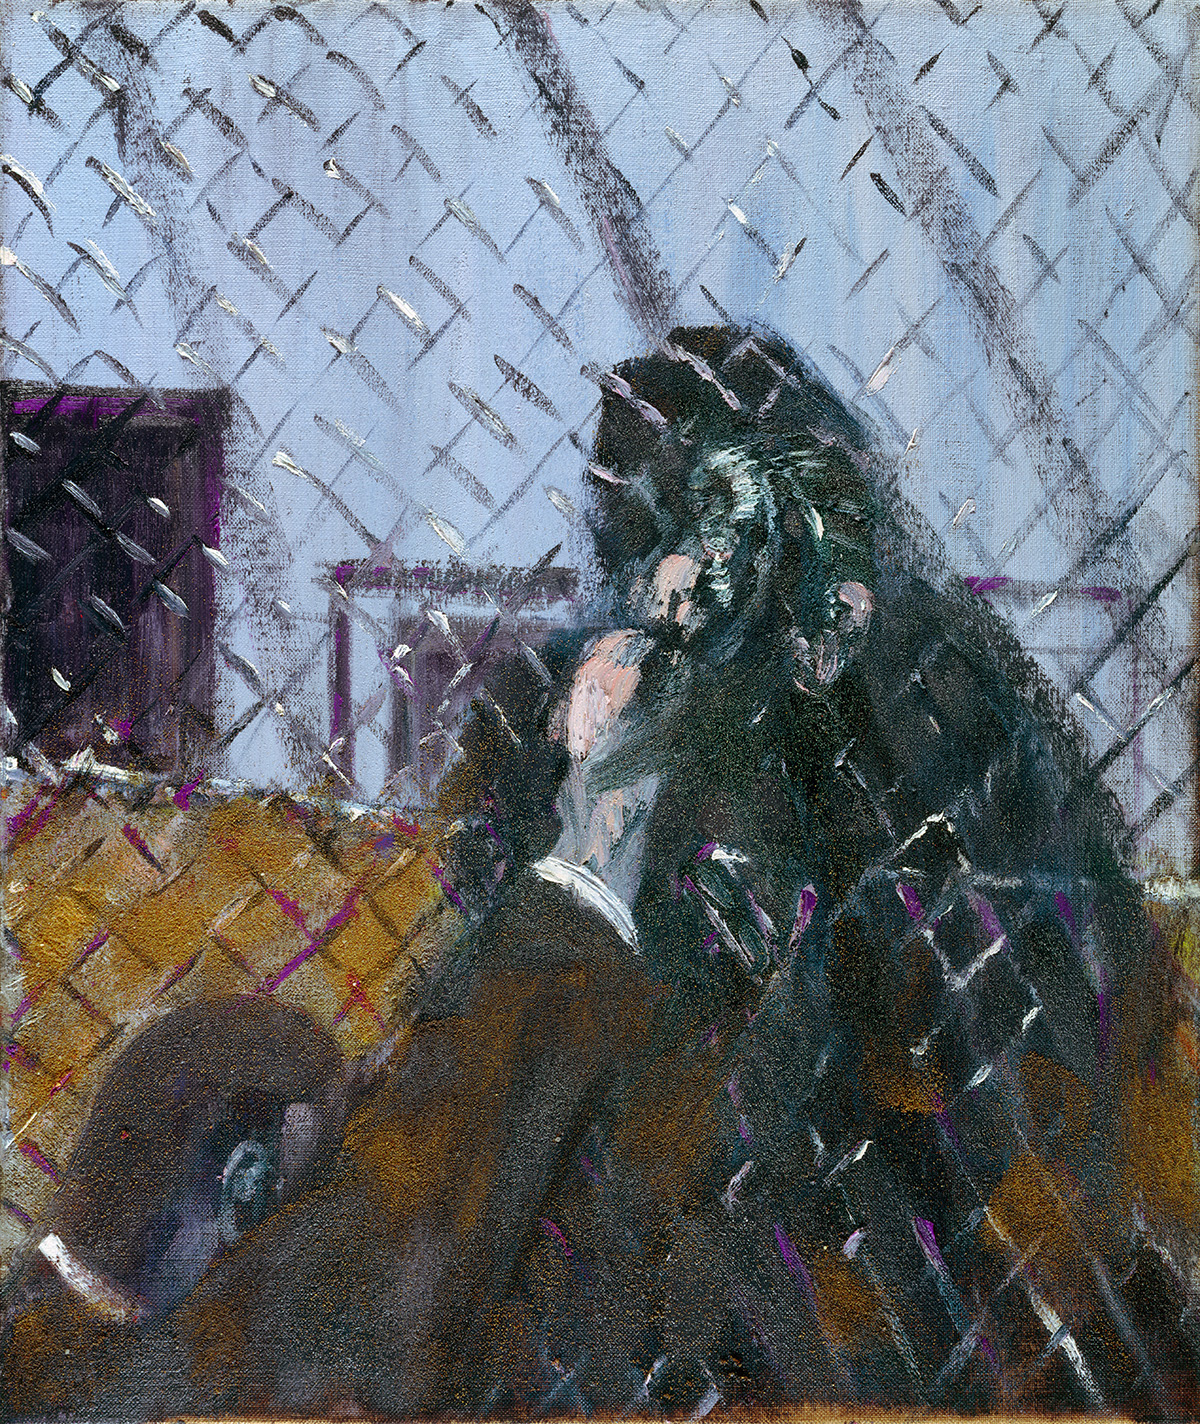 Francis Bacon, Figure with Monkey, 1951. Oil on canvas. CR number 51-01. © The Estate of Francis Bacon / DACS London 2019. All rights reserved.